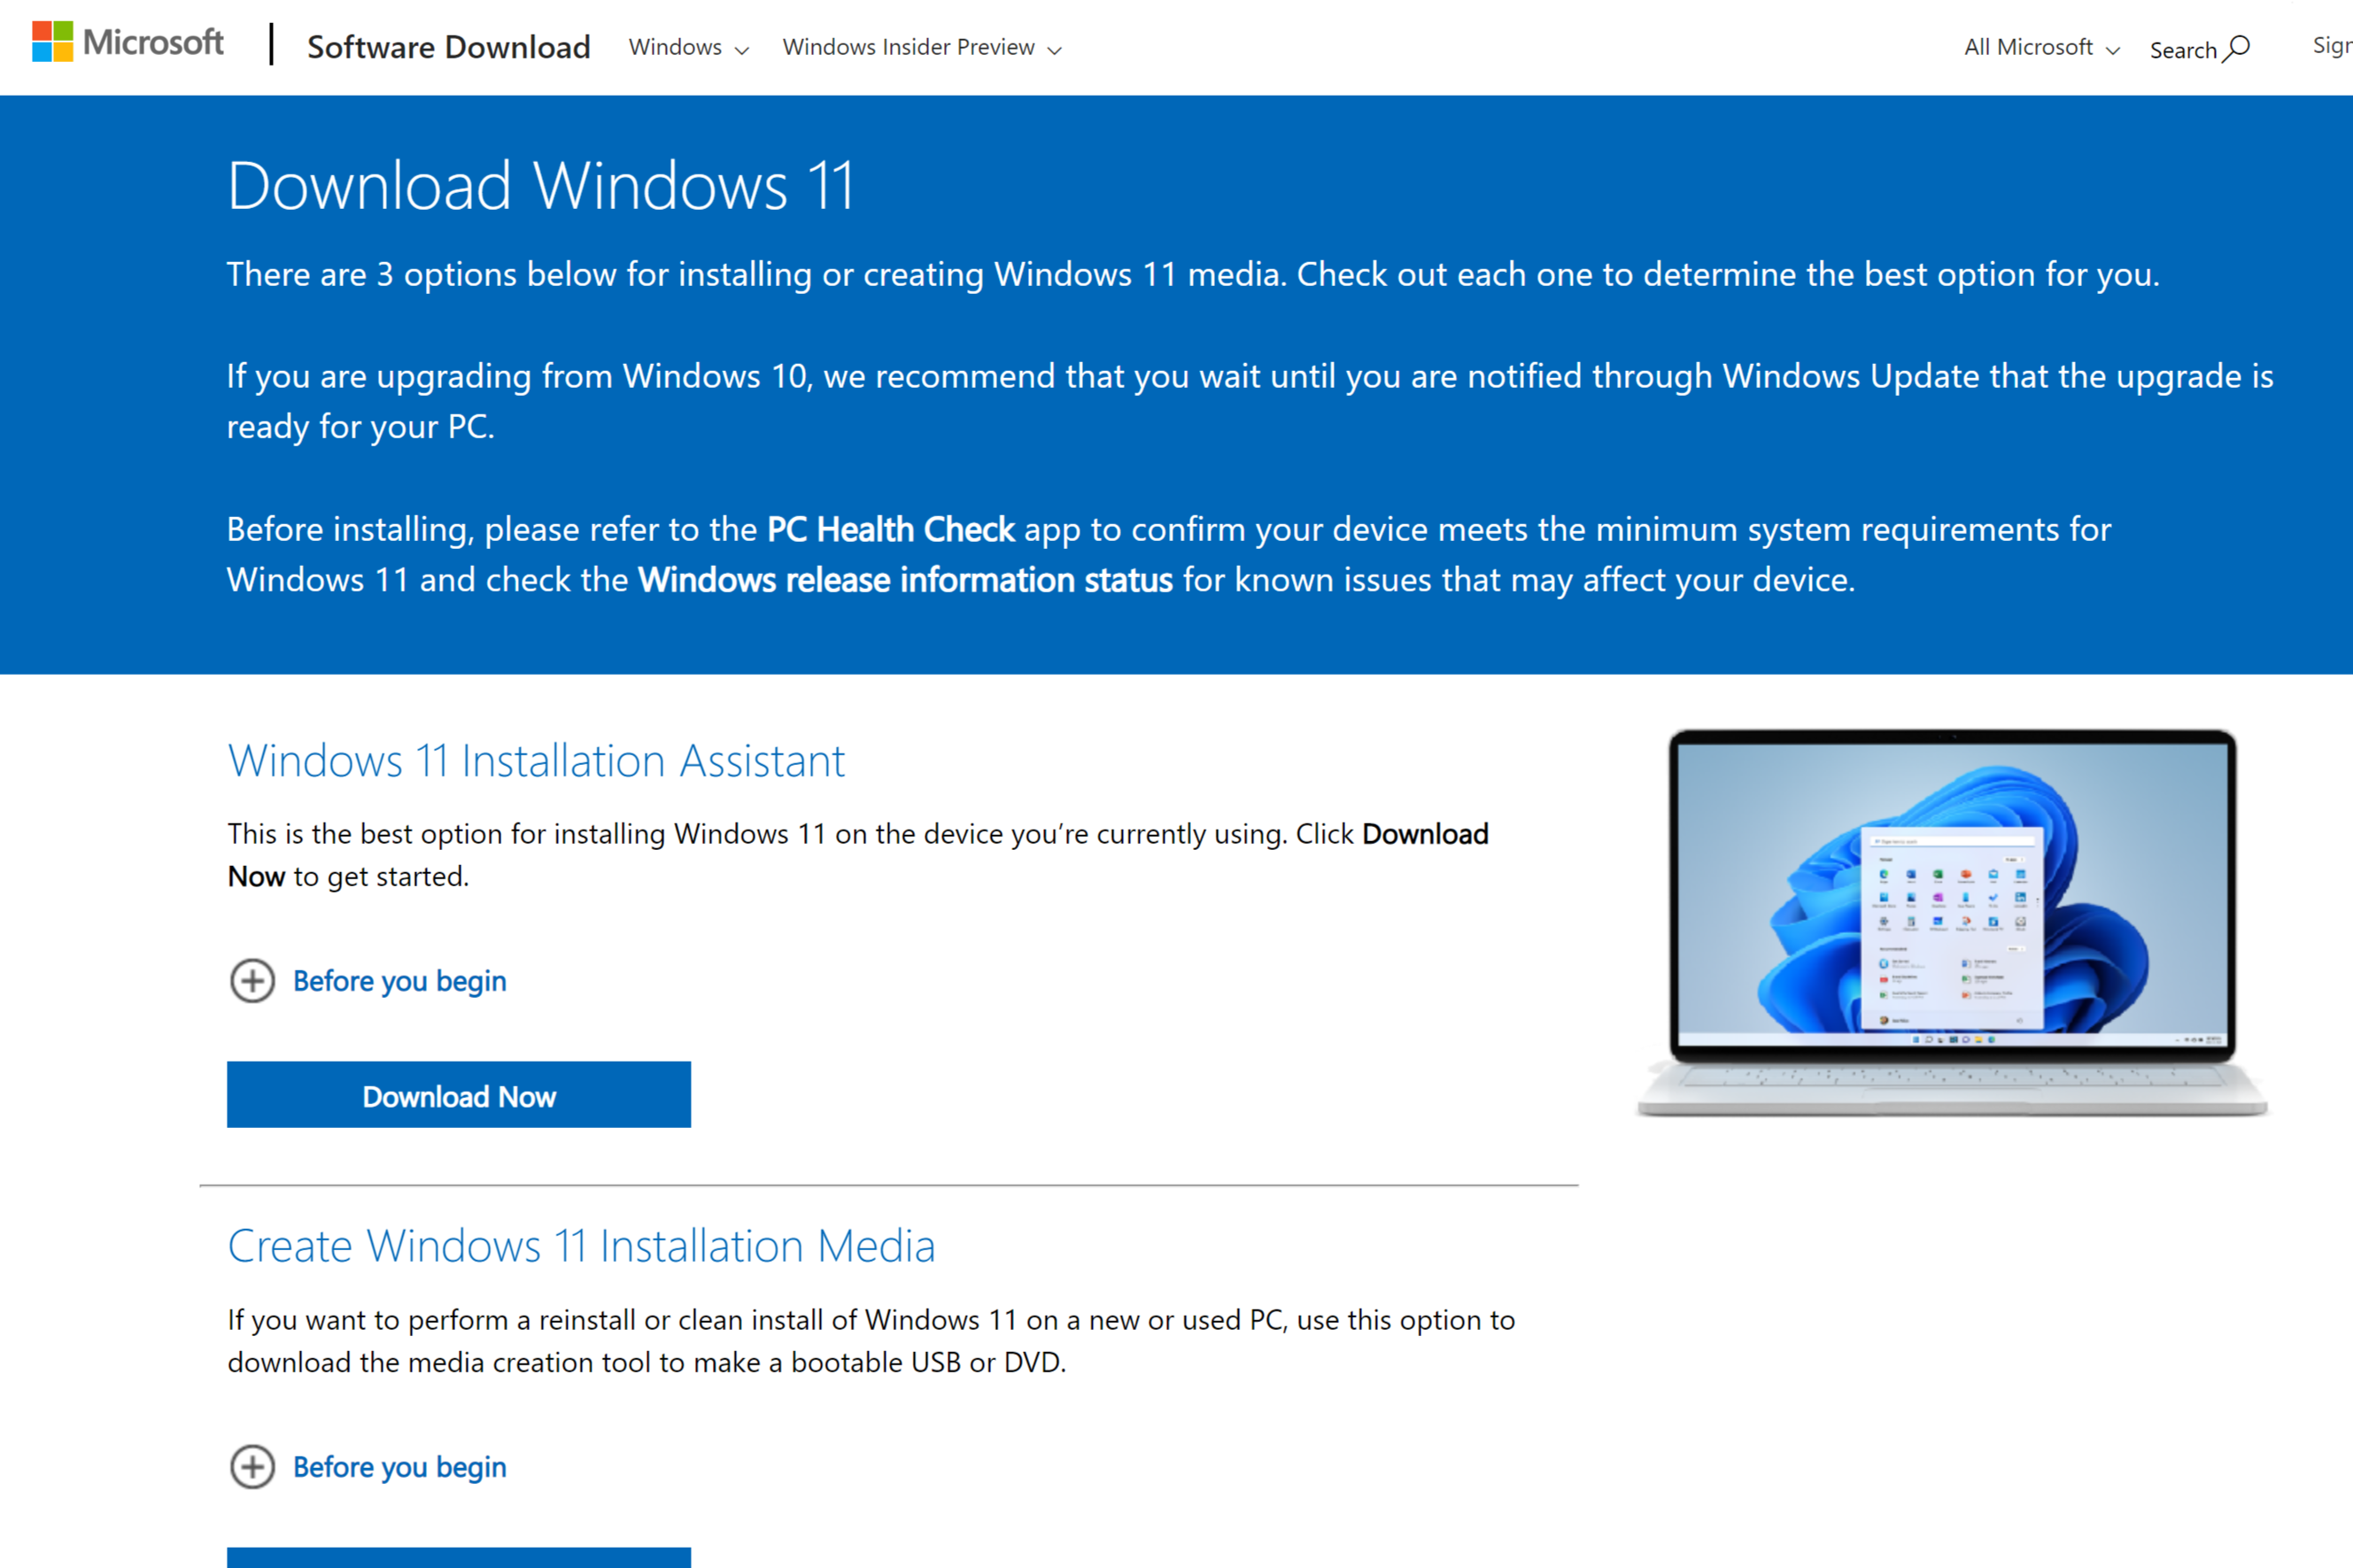 Visit the Microsoft website to check out Windows 11